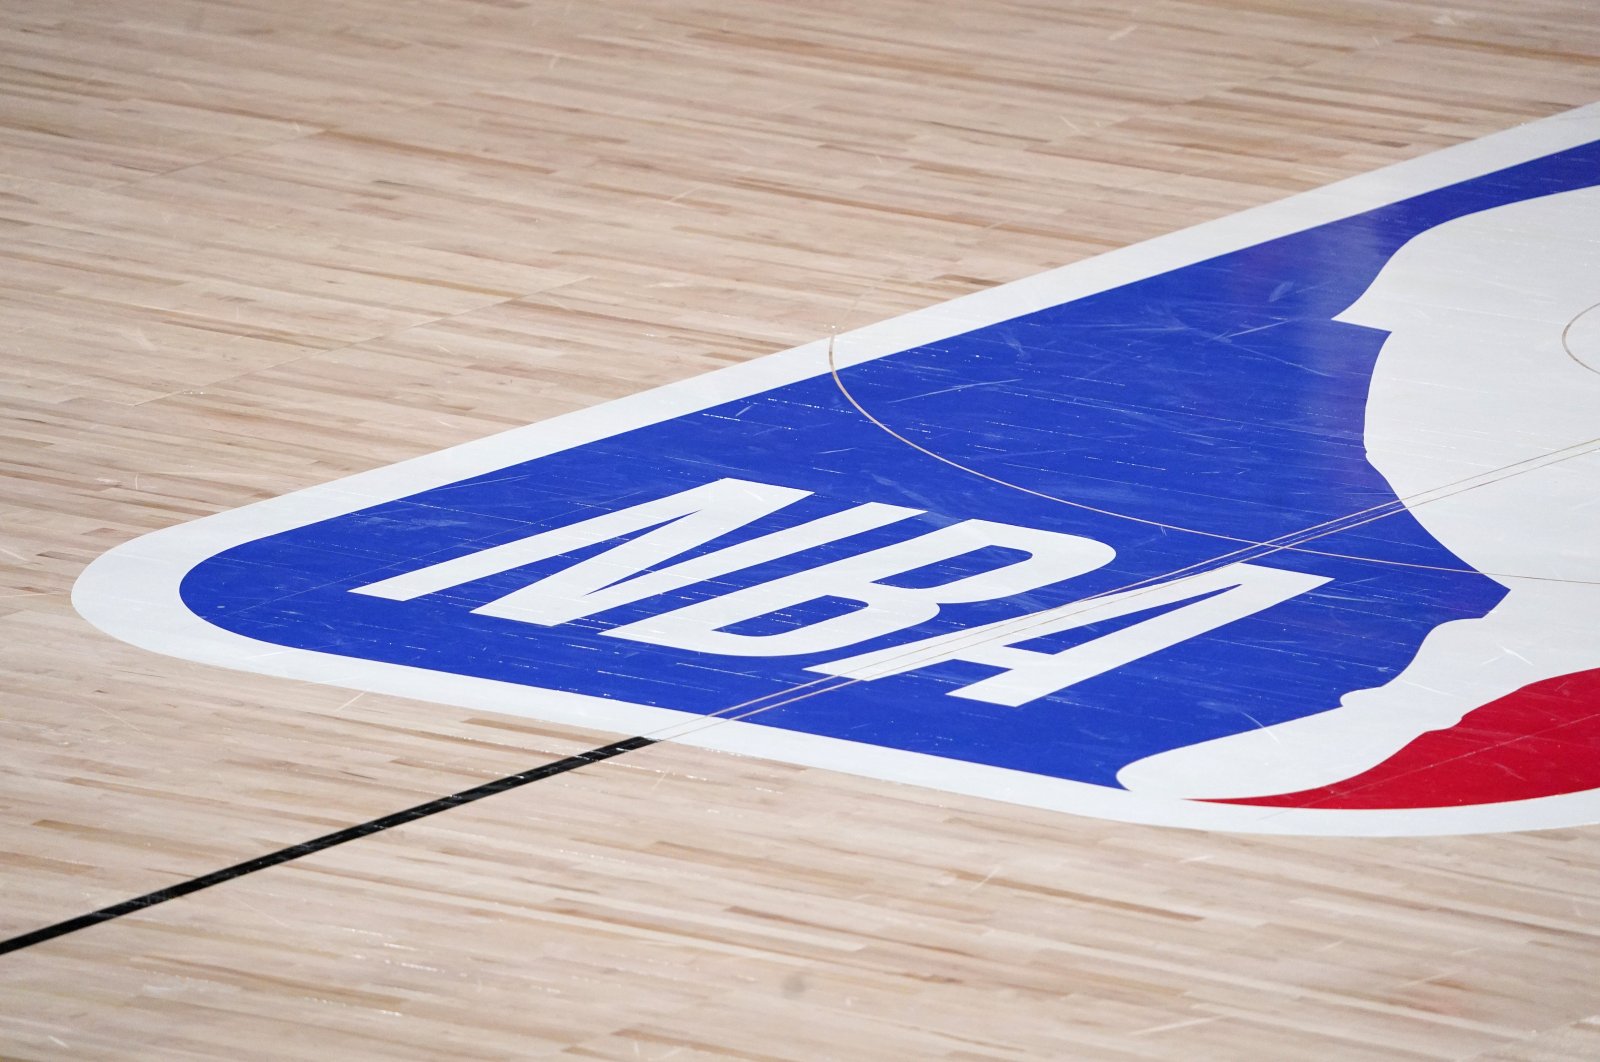 The NBA logo is displayed at the center court during an NBA first-round playoff basketball game between the Houston Rockets and Oklahoma City Thunder in Lake Buena Vista, Florida, U.S., Dec. 1, 2020. (AP Photo)